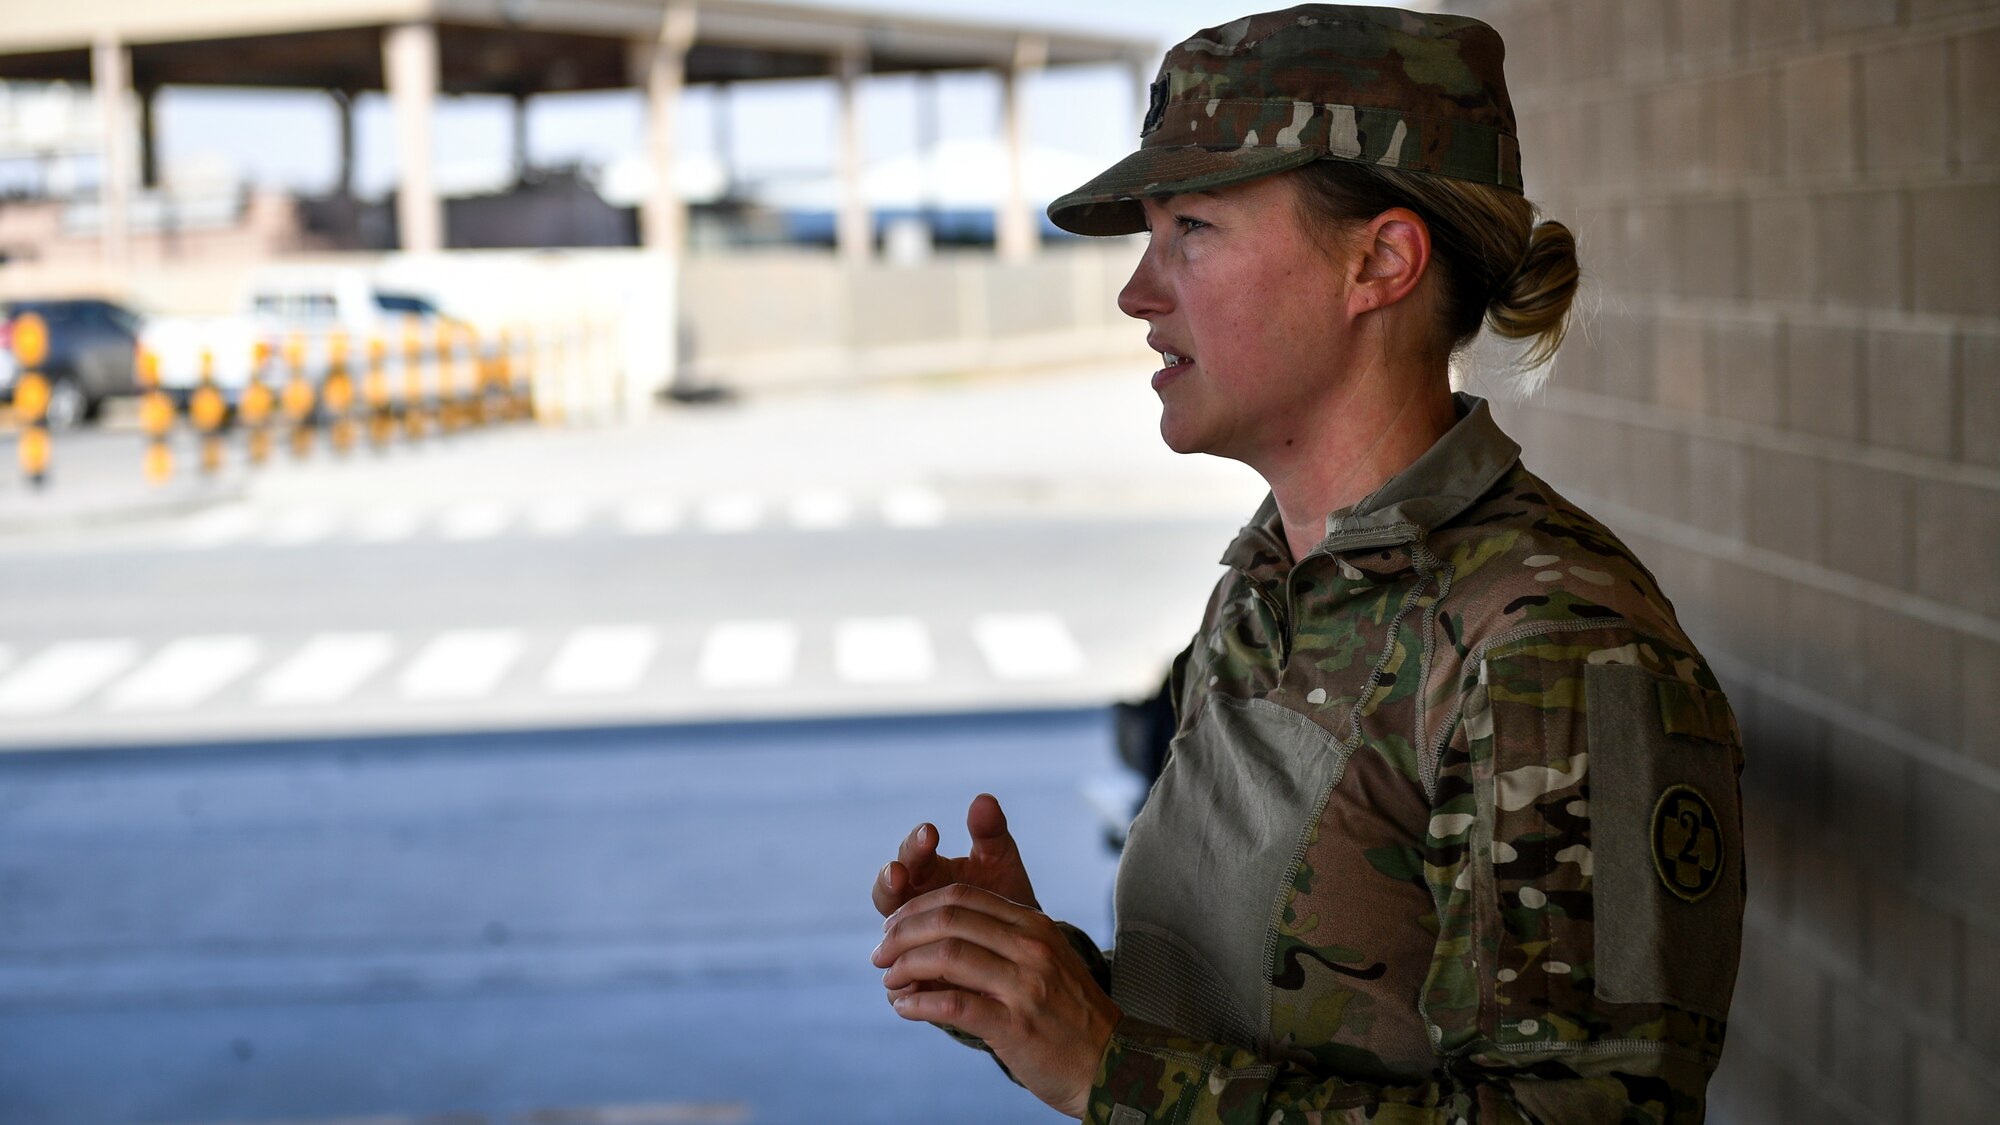 U.S. Army Capt. Amanda Sayers, 149th Medical Detachment Veterinary Service Support veterinarian clinical specialist, speaks about military working dog emergency life-saving procedures at Al Salem Air Base, Kuwait, Sept. 13, 2019. As part of the exercise, U.S. Army veterinary doctors worked with emergency medical responders sharing life-saving measures for MWDs in case of extreme emergencies where veterinary technicians might not be available. (U.S. Air Force photo by Staff Sgt. Mozer O. Da Cunha)